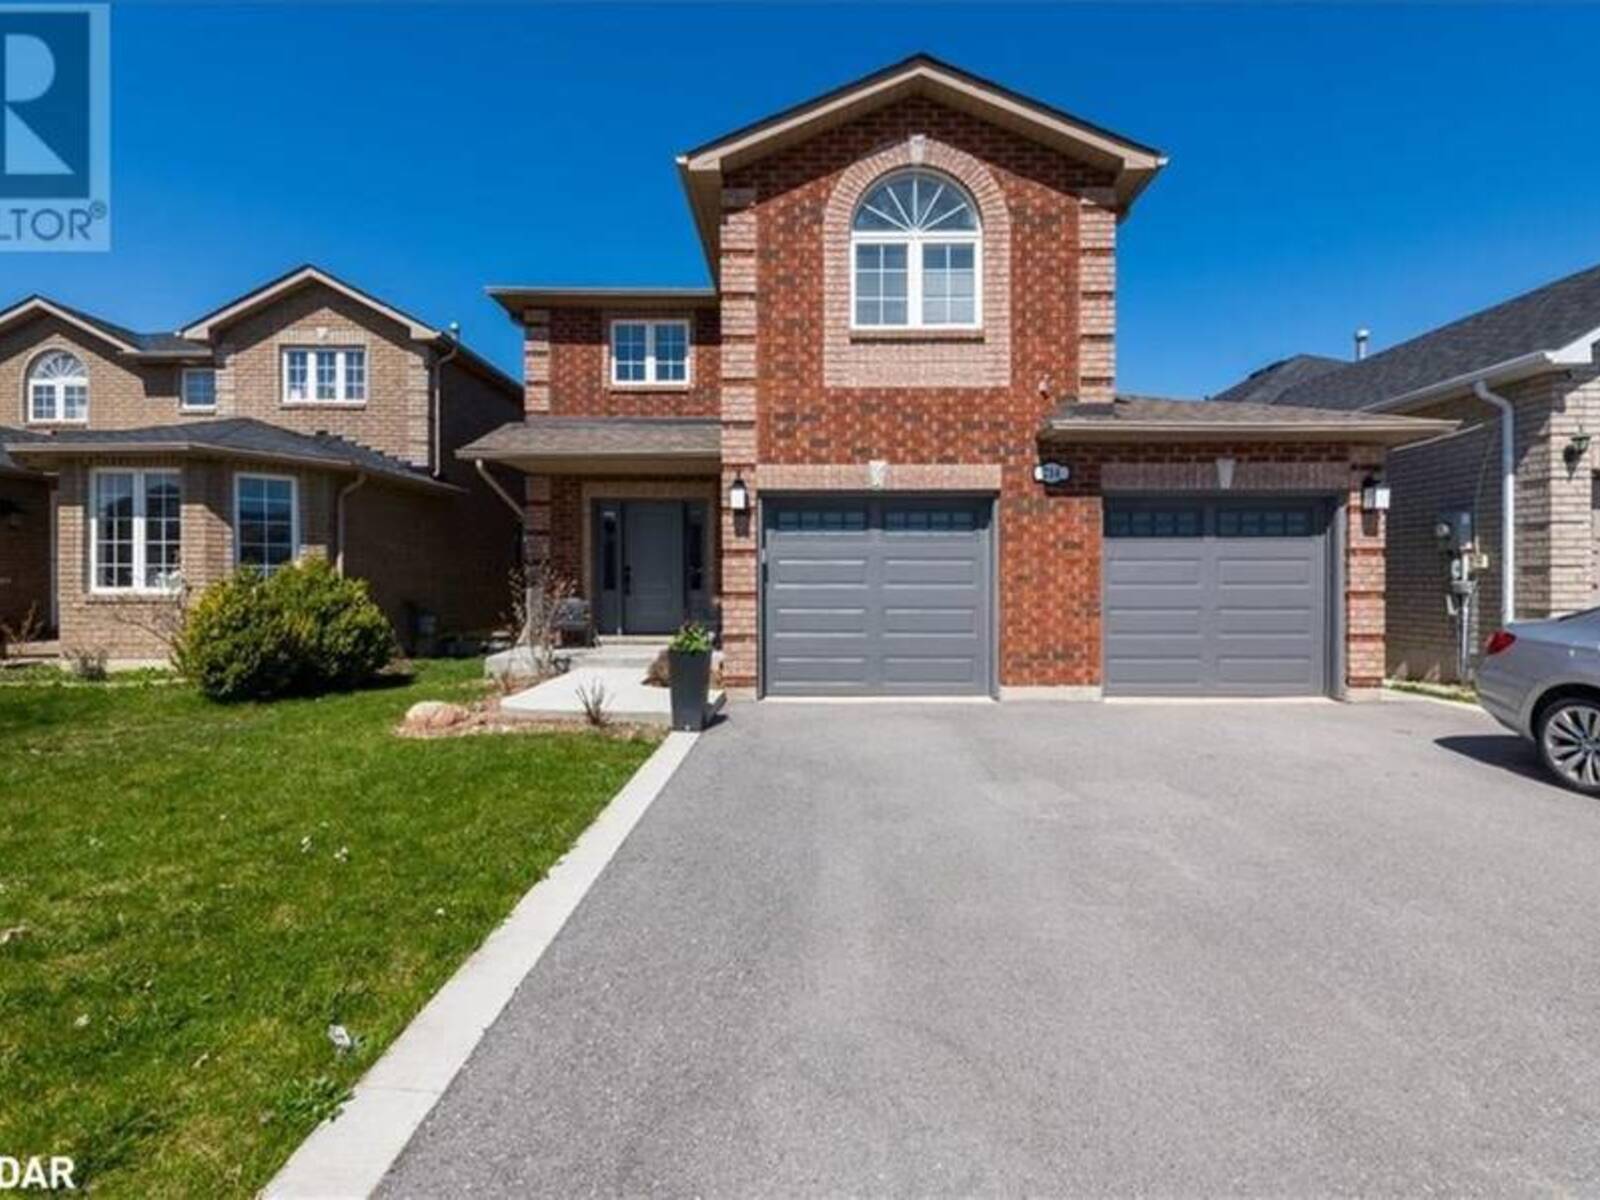 214 COUNTRY Lane, Barrie, Ontario L4N 0W1